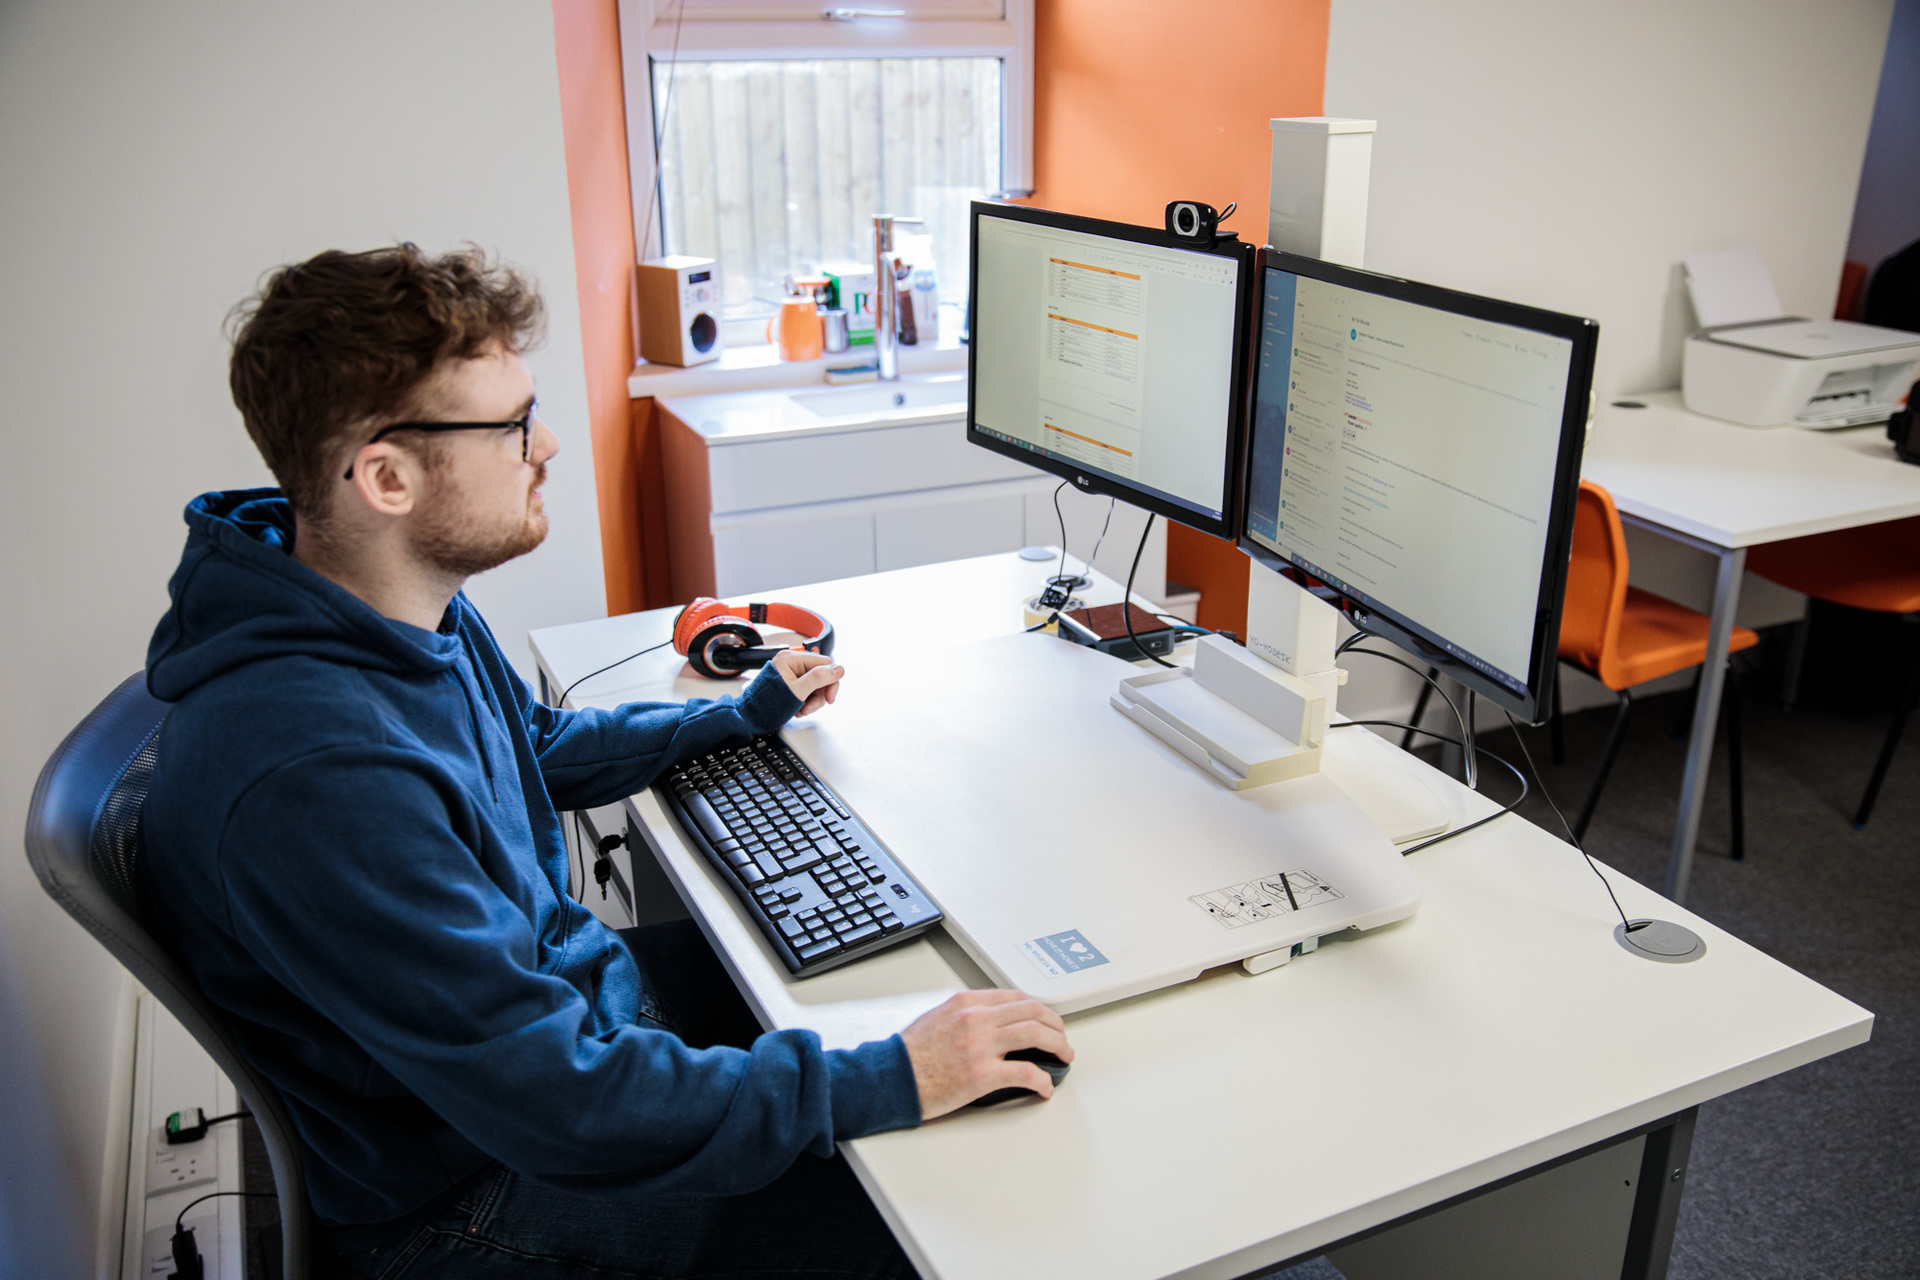 A social media executive working on his desktop computer in an office